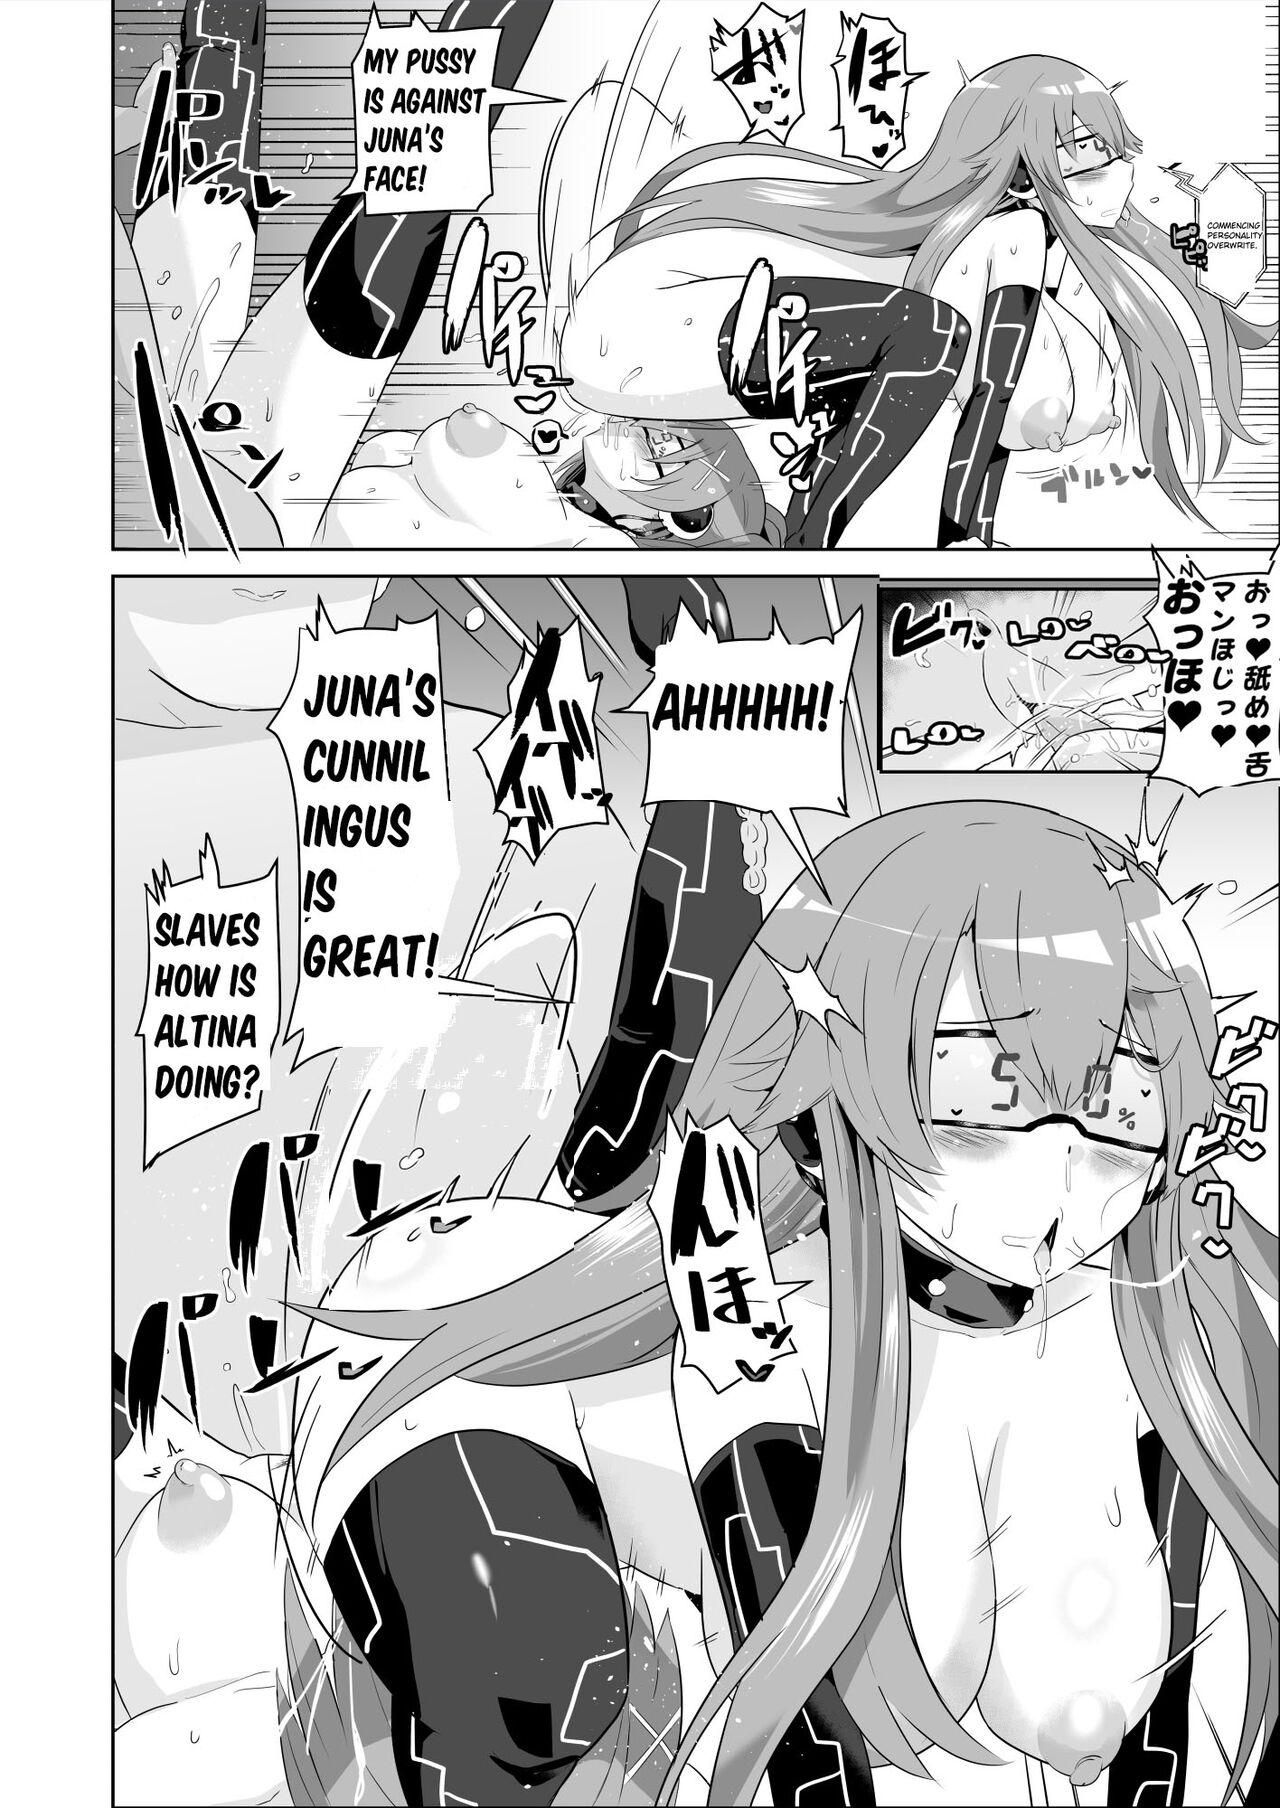 Caliente Hypnosis of the New Class VII - Class X's Enslavement - The legend of heroes | eiyuu densetsu Athletic - Page 3